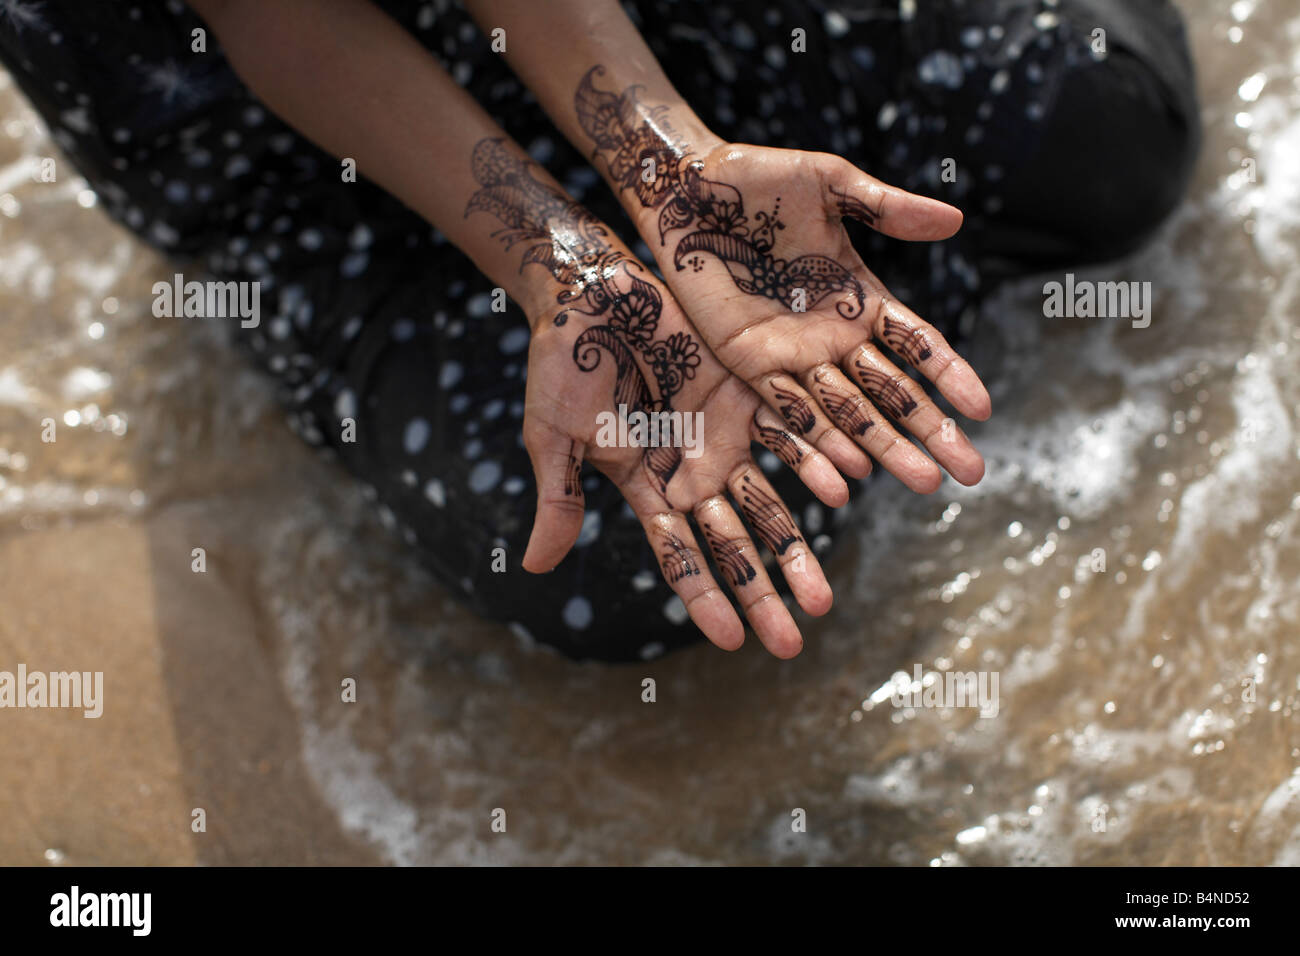 Henna on the hands of a Muslim woman, Somalia Stock Photo